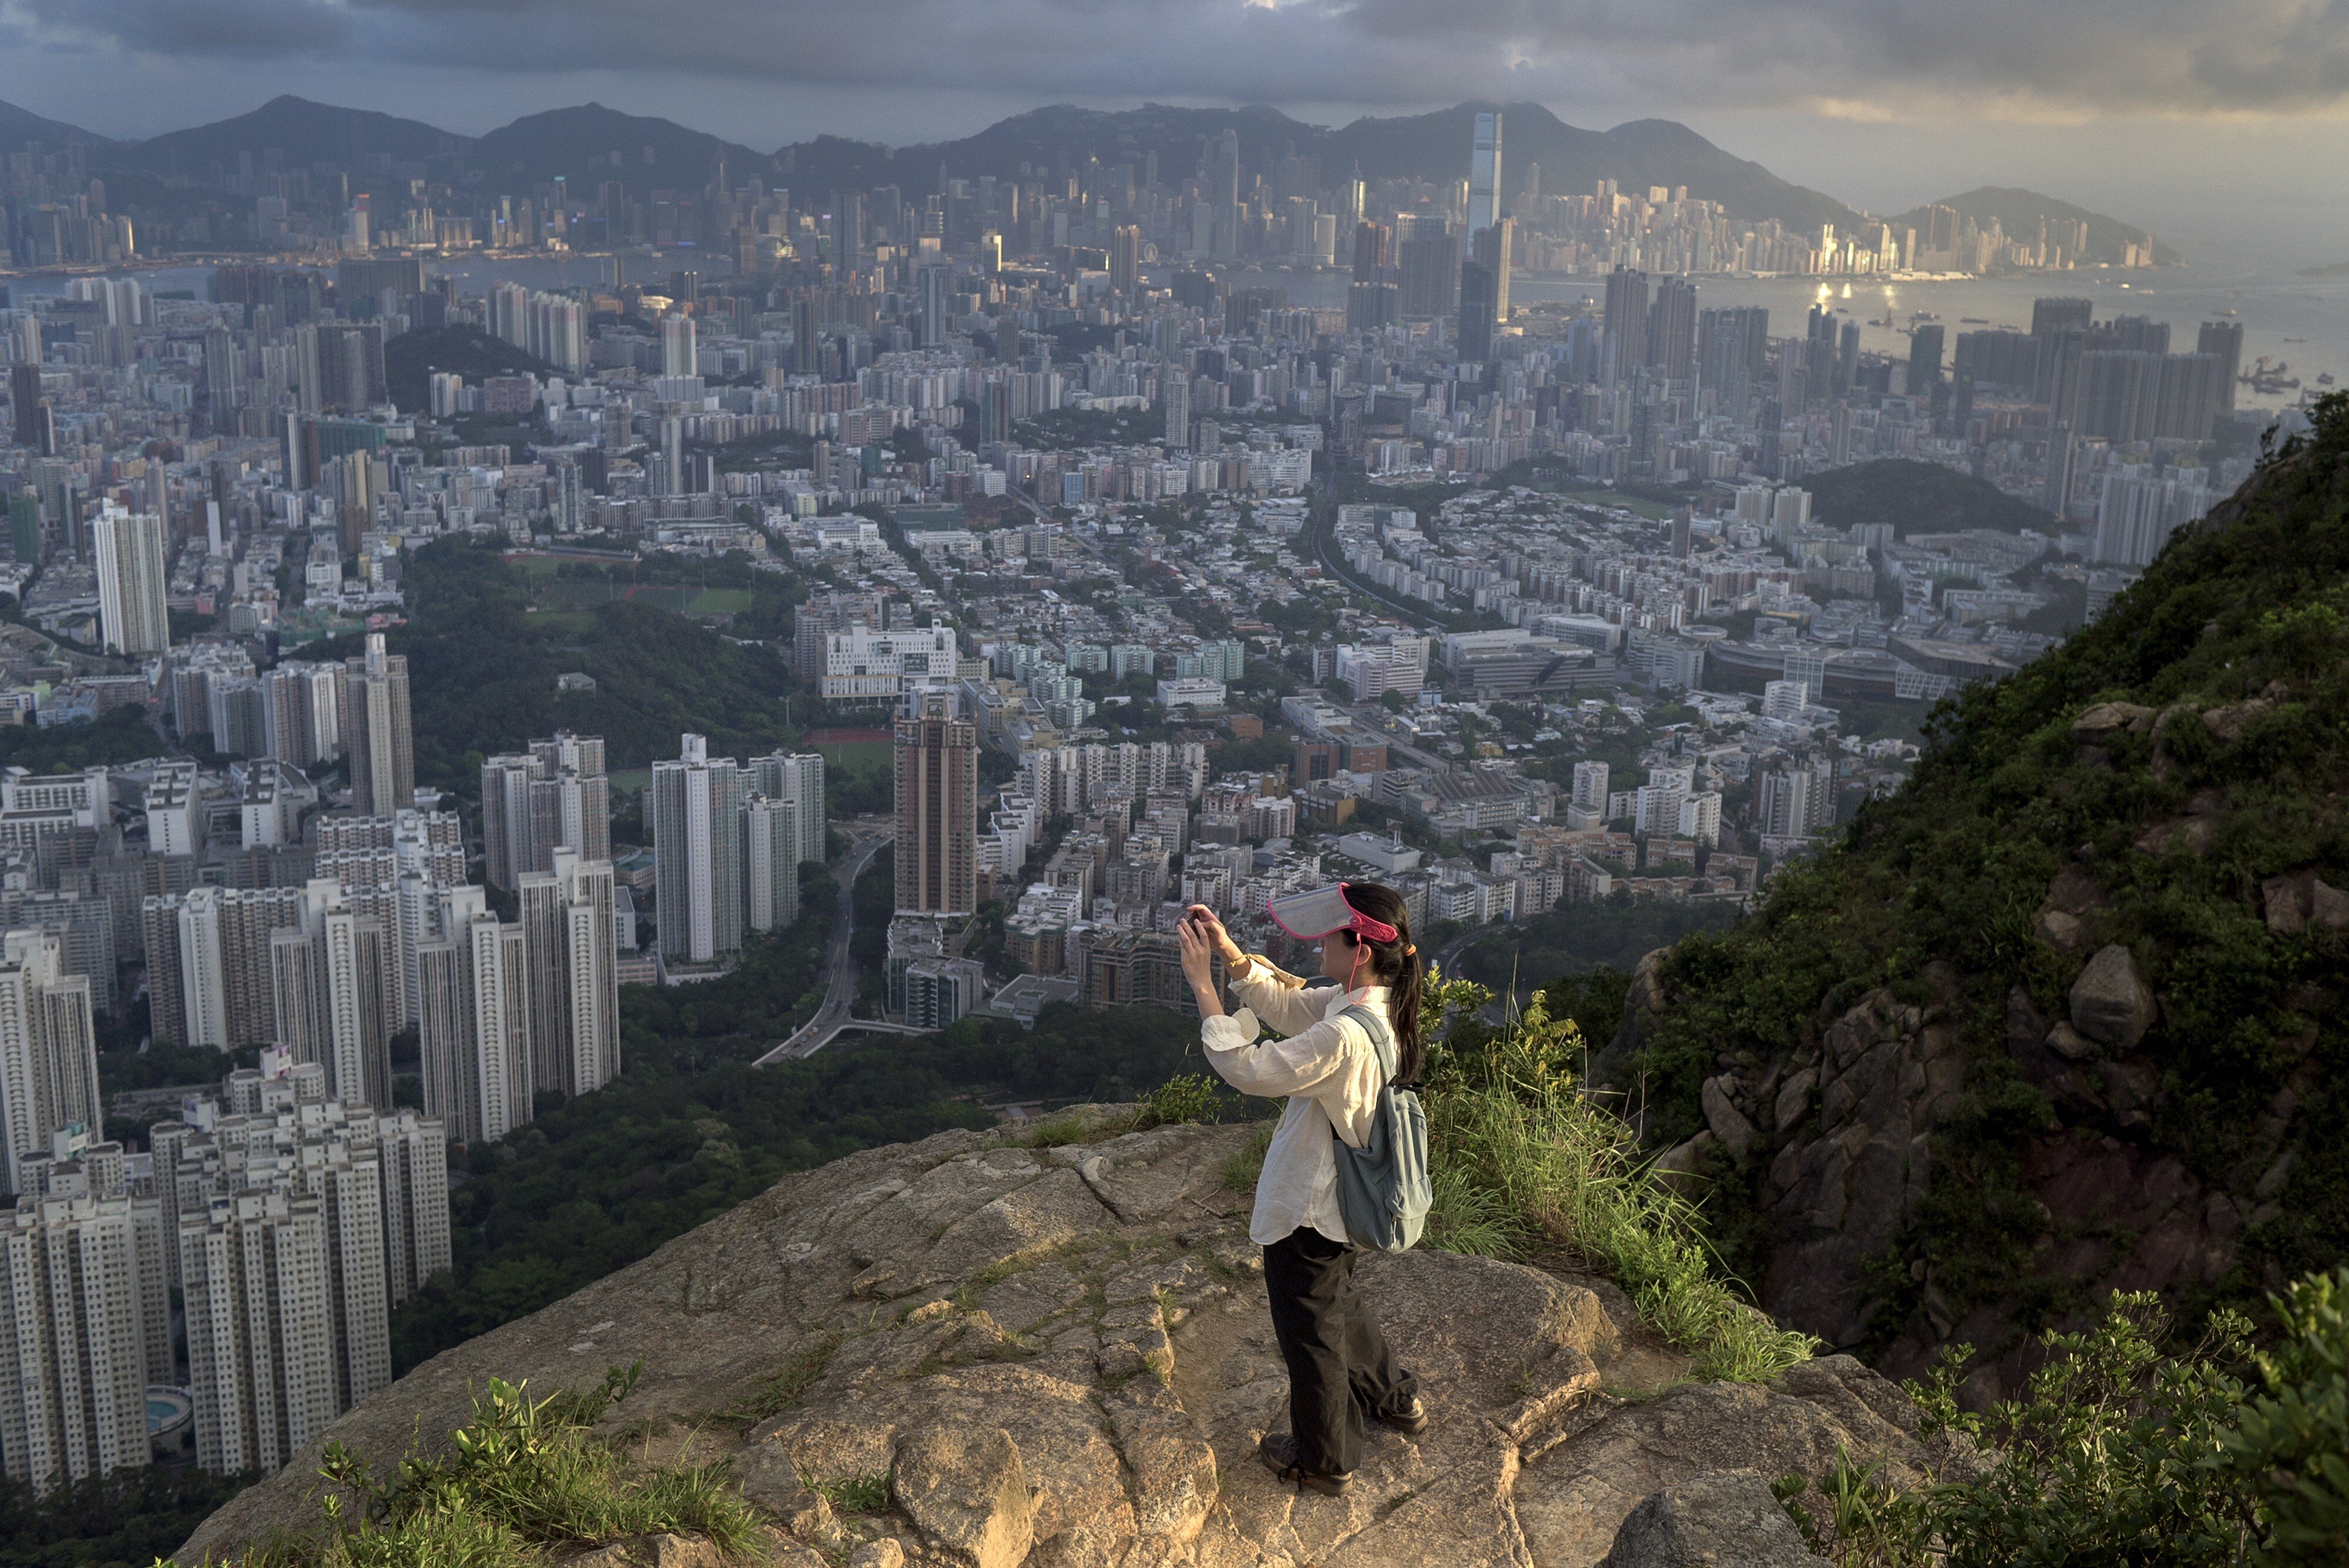 The resurgence in Covid-19 infections in the summer, as well as the implementation of the national security law created a flight of capital. But, as is usually the case, Hong Kong ‘will adjust, reset and move on’. Photo: AFP